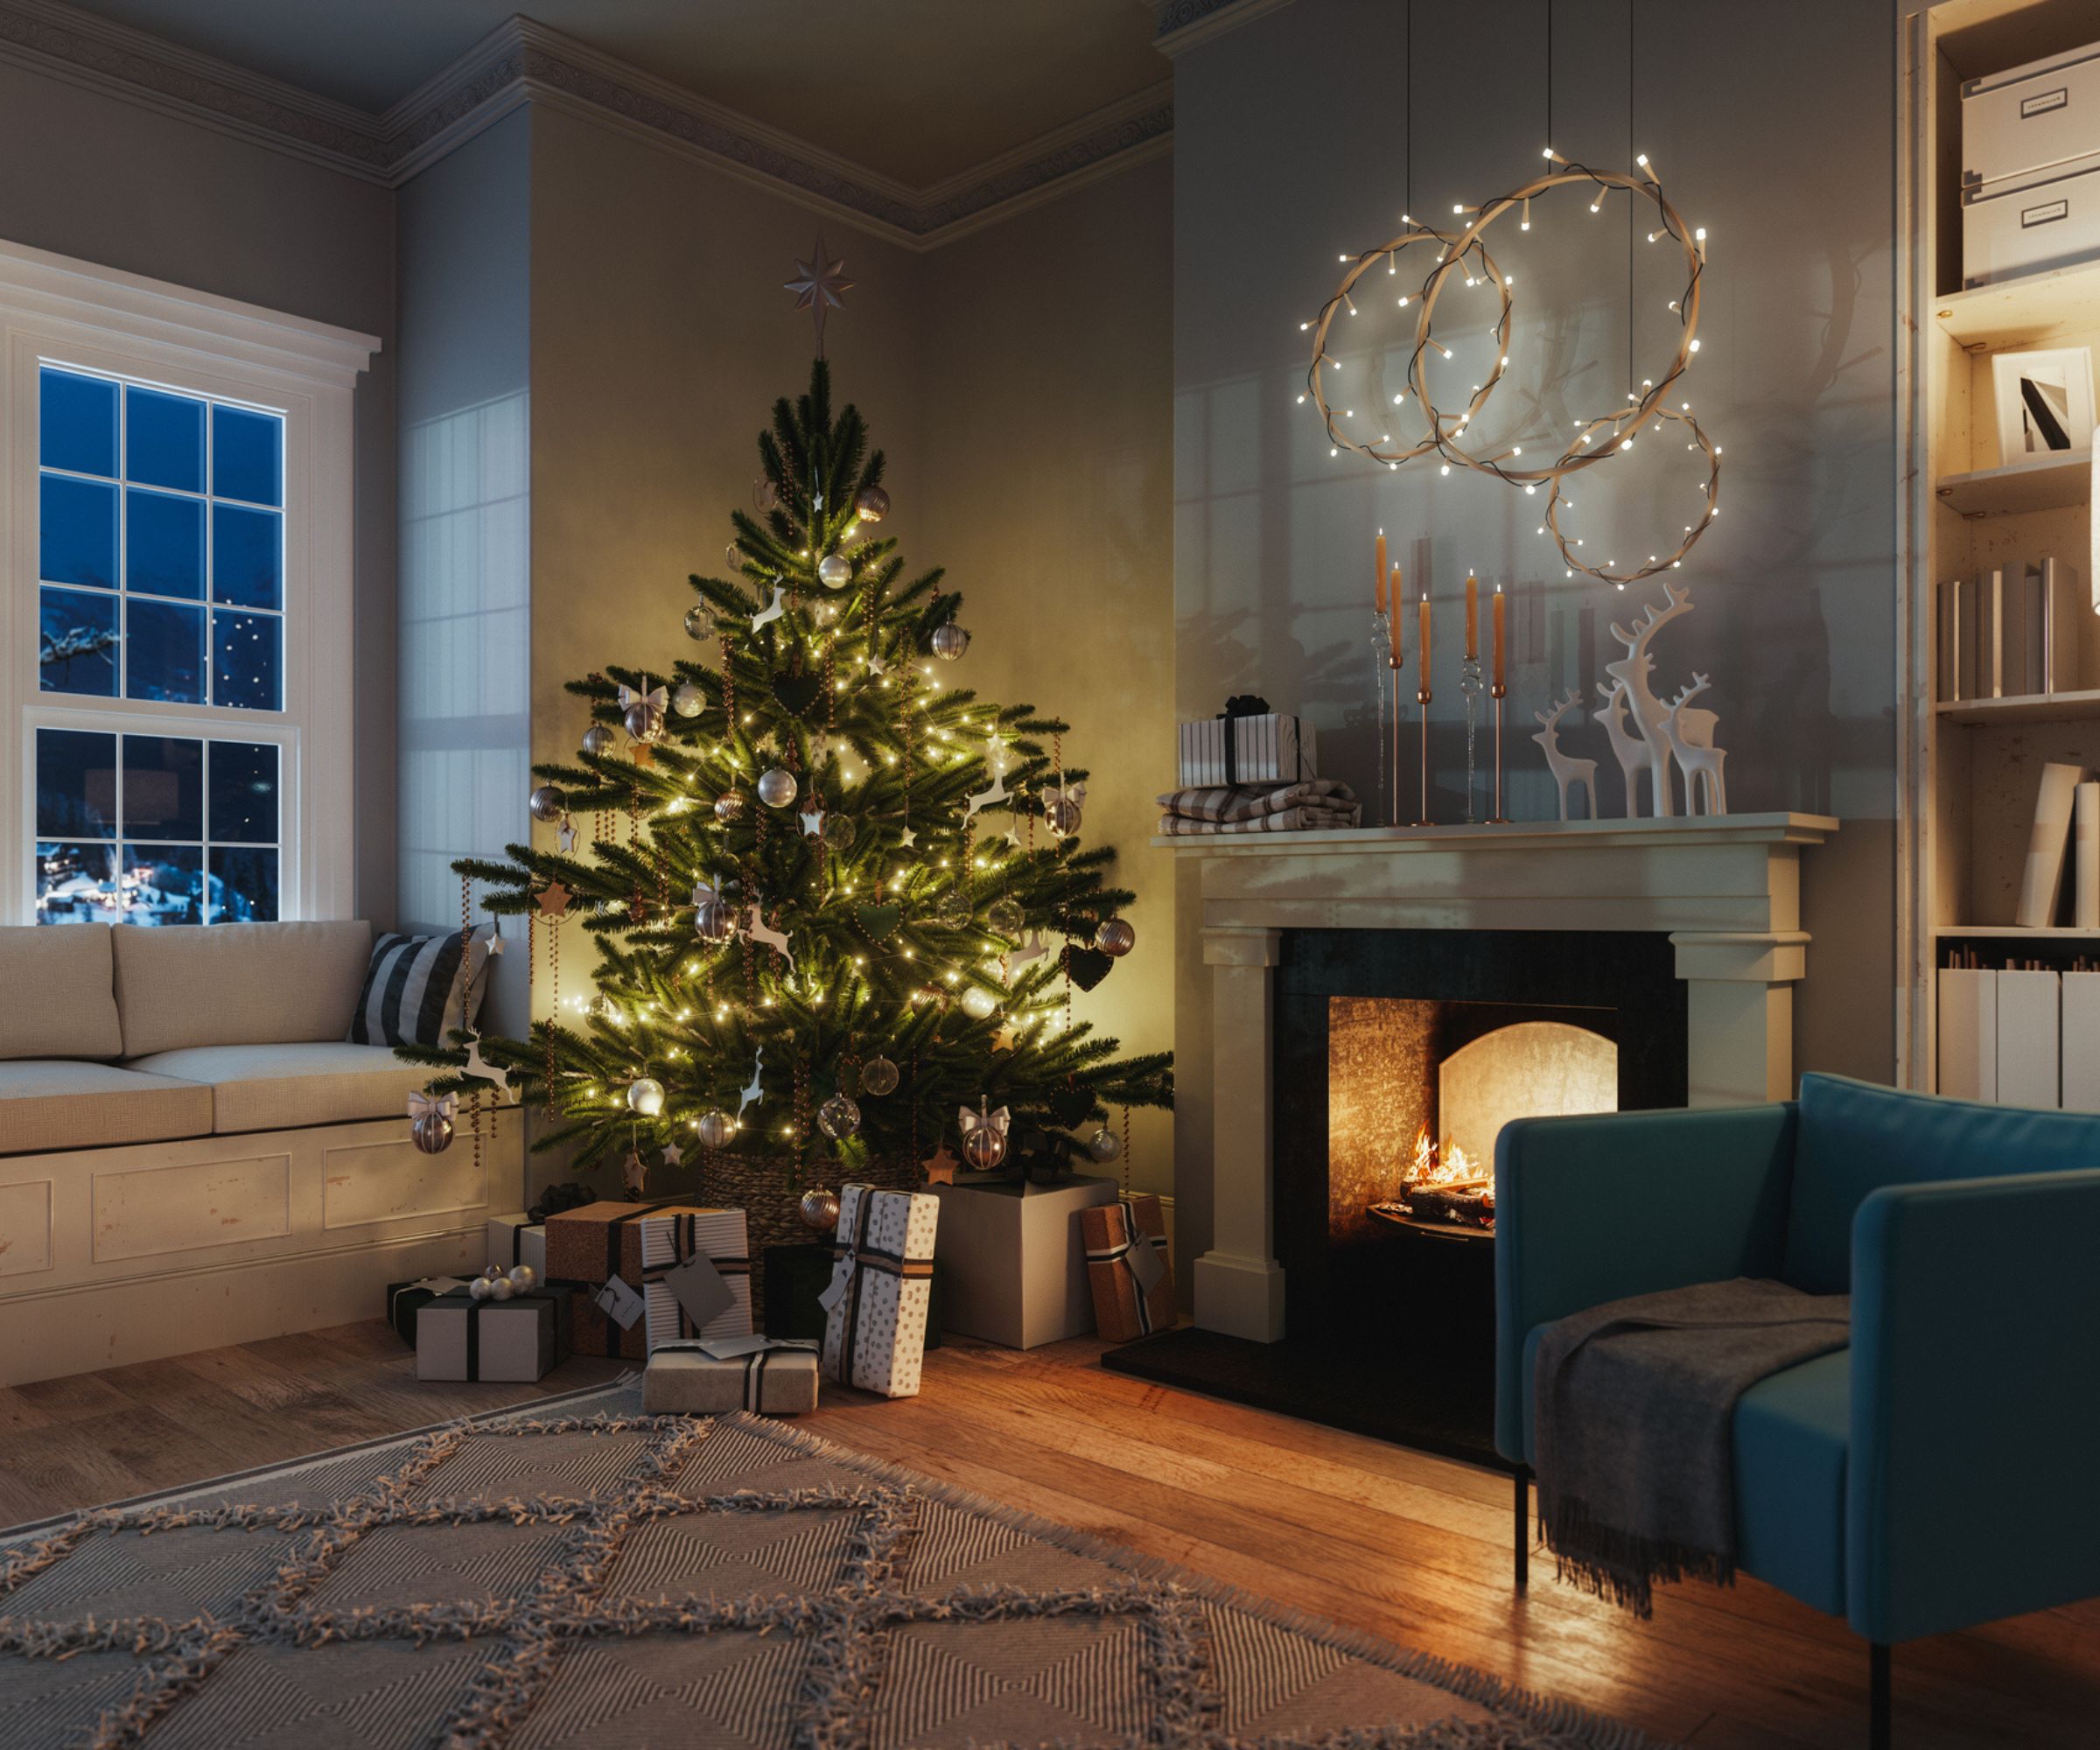 6 Feng Shui Christmas decorating rules: to improve your luck